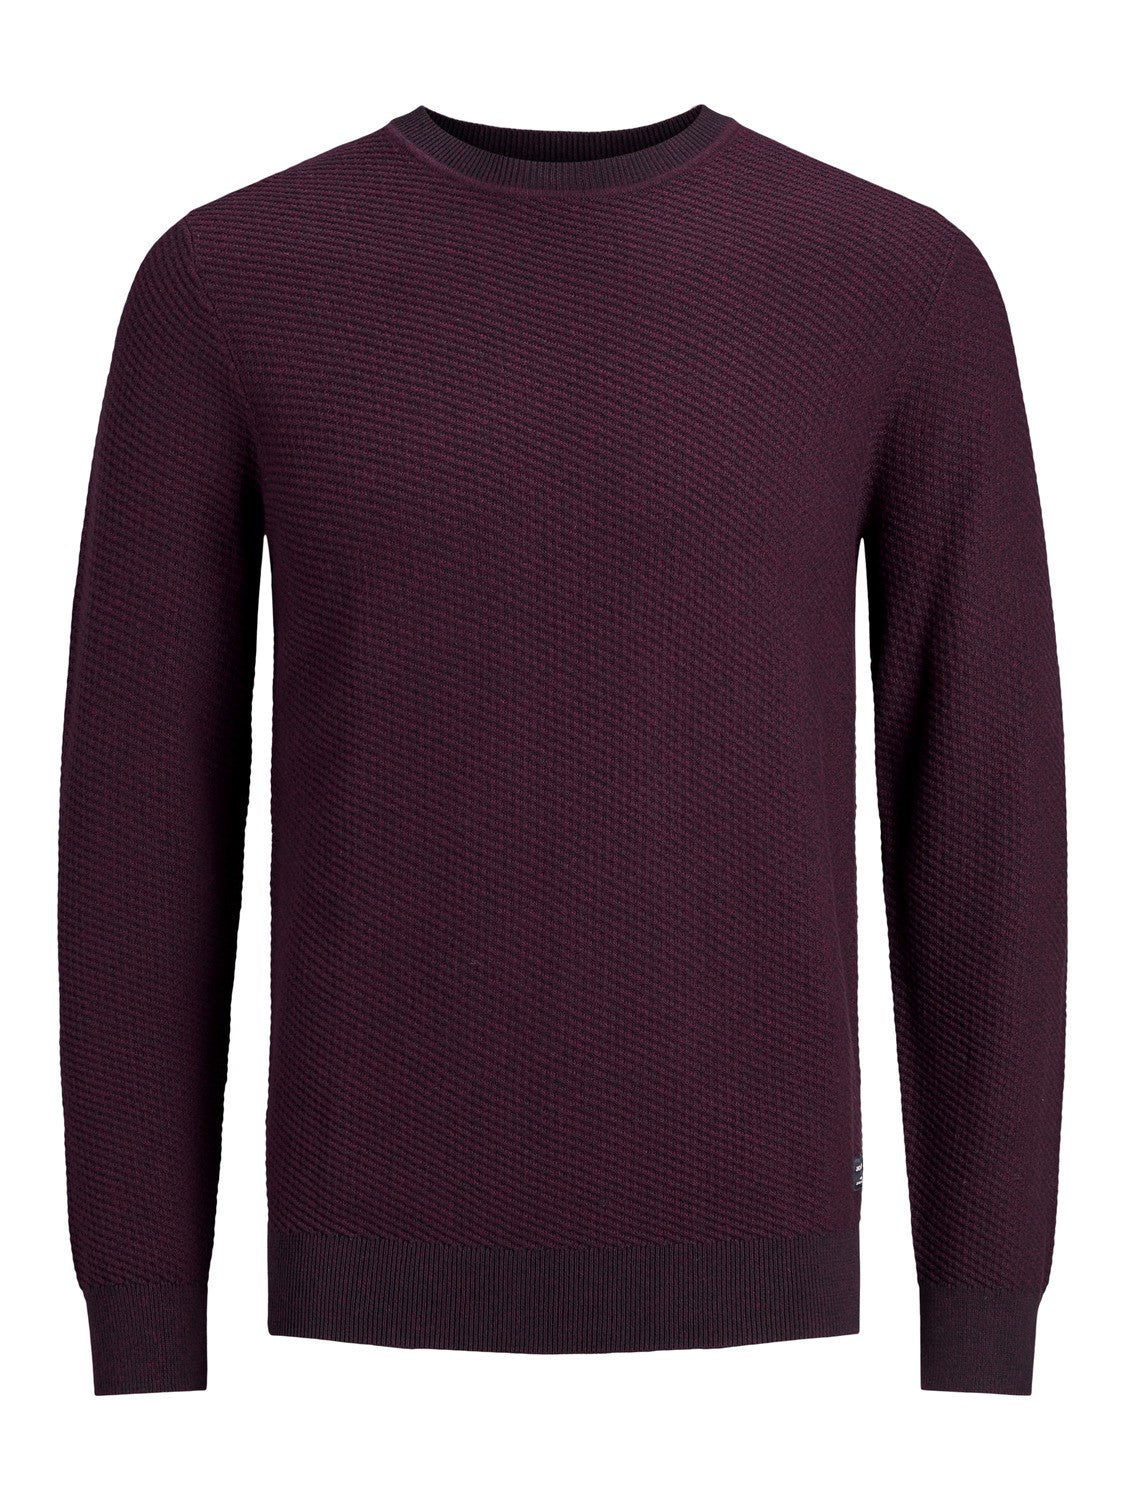 Marlow Knit Structure Sweater - Spirit Clothing